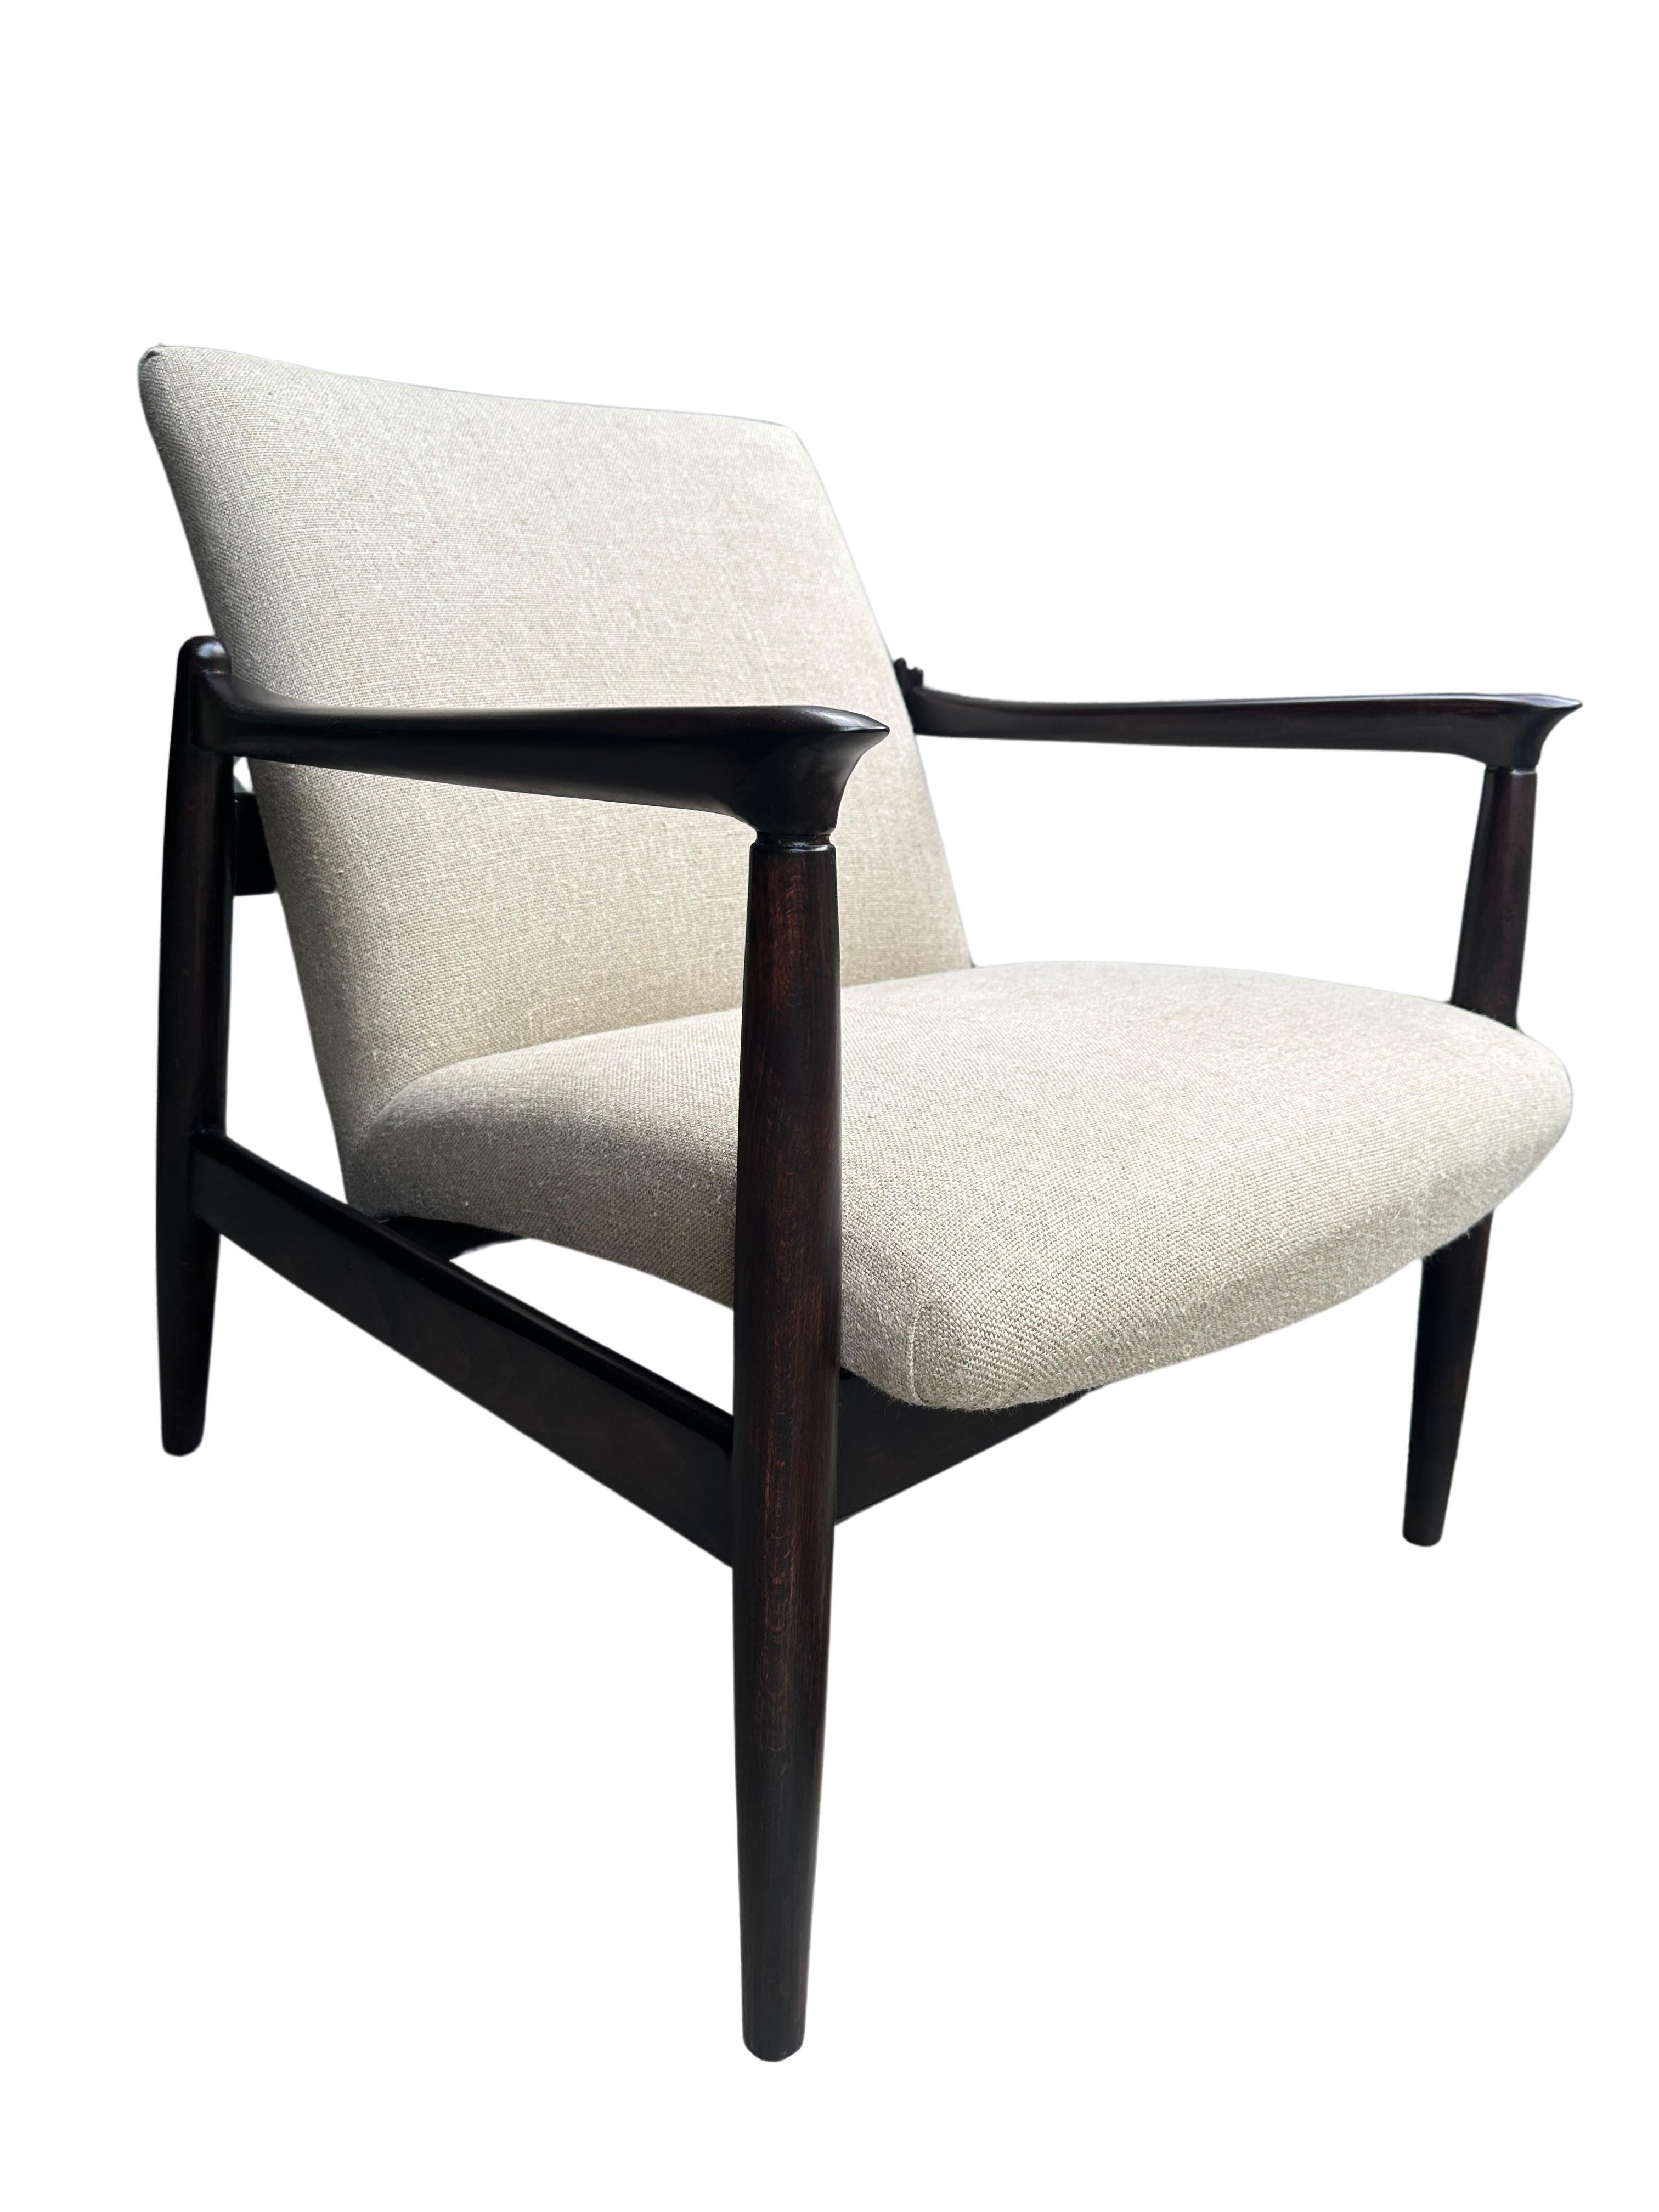 One of the icon of Polish mid-century design model GFM-64 armchairs, designed by Edmund Homa - Polish architect, industrial and interior design designer, professor at the Academy of Fine Arts in Gdansk. The set has been manufactured by Goscicinska